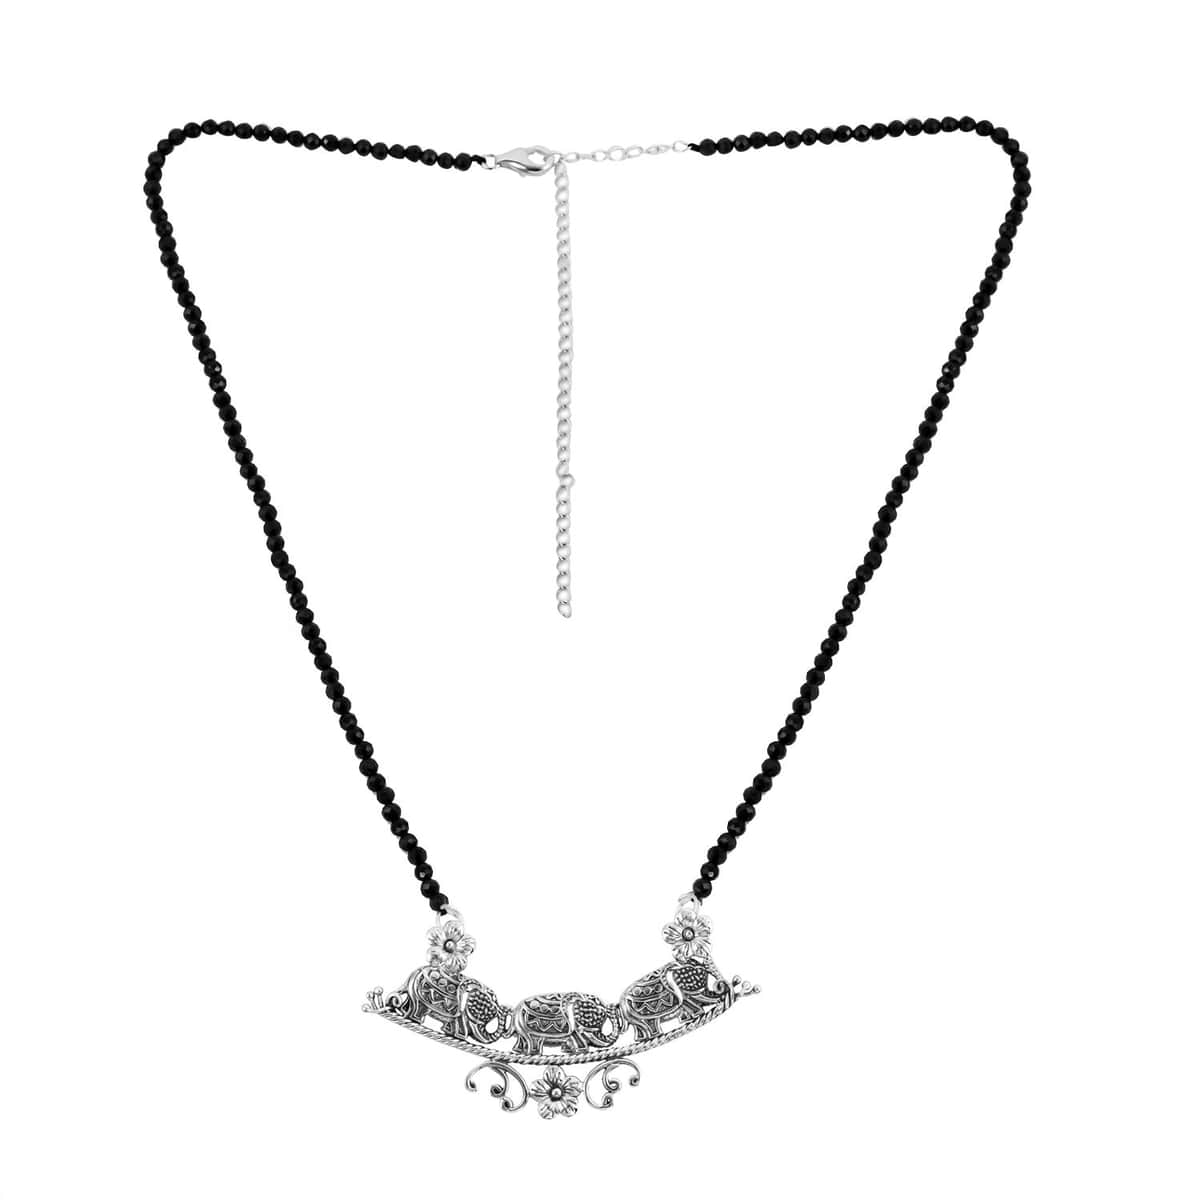 Mother’s Day Gift Bali Legacy Thai Black Spinel Beaded Necklace, Elephant Necklace, Sterling Silver Necklace, Spinel Beads Necklace, 20-22 Inch Necklace 32.50 ctw image number 3